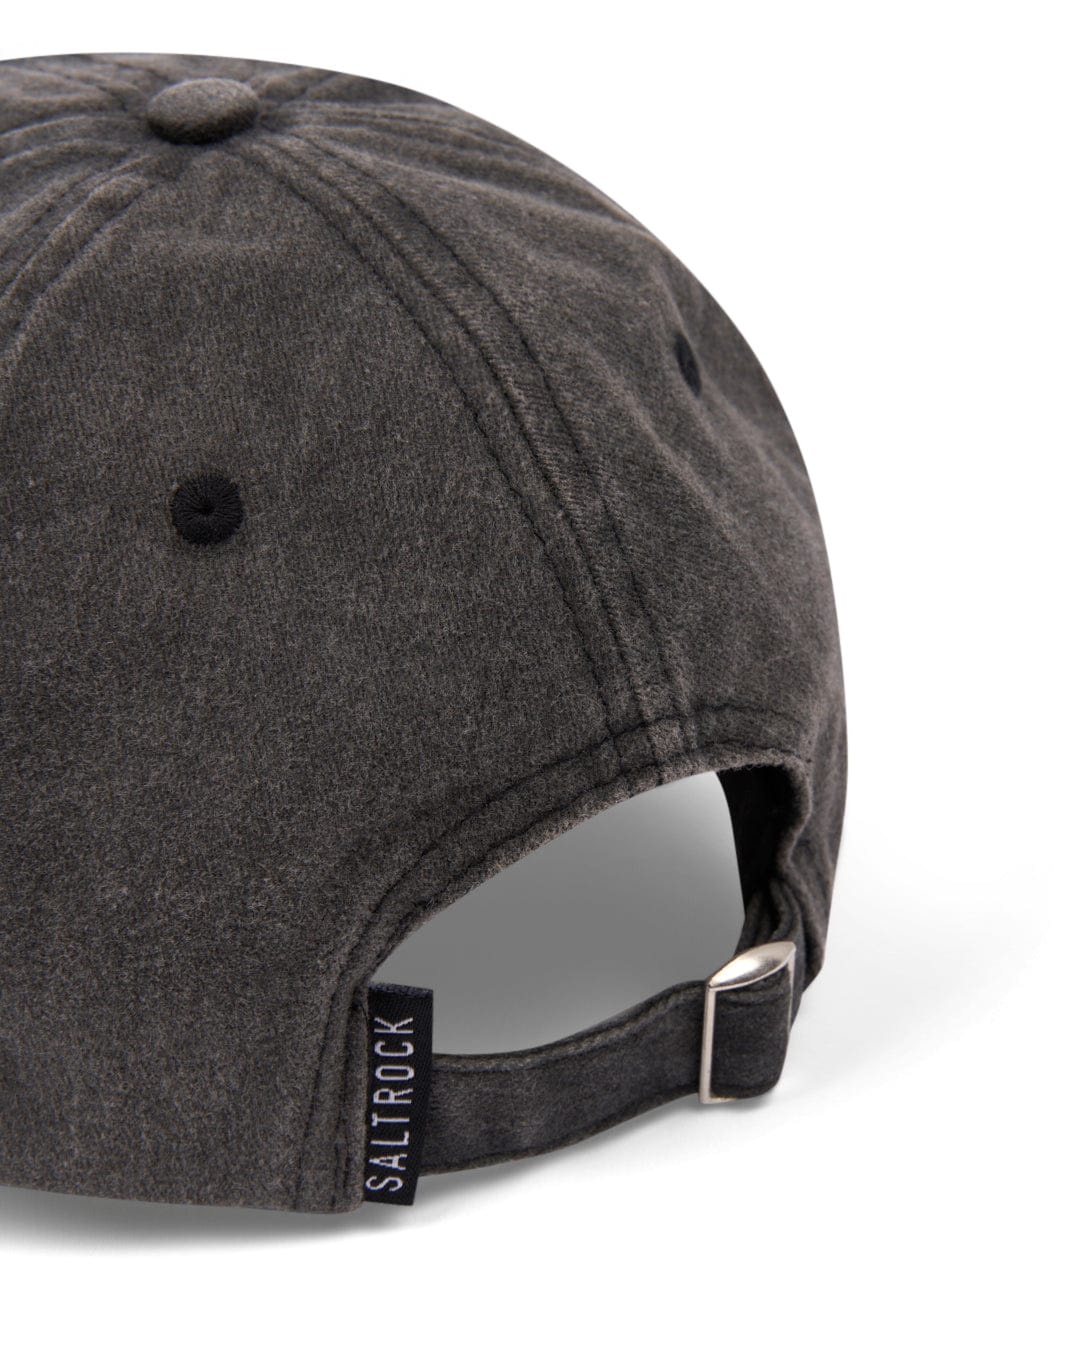 Close-up of a gray SR Original Cap by Saltrock with an adjustable strap and a "Saltrock" badge.